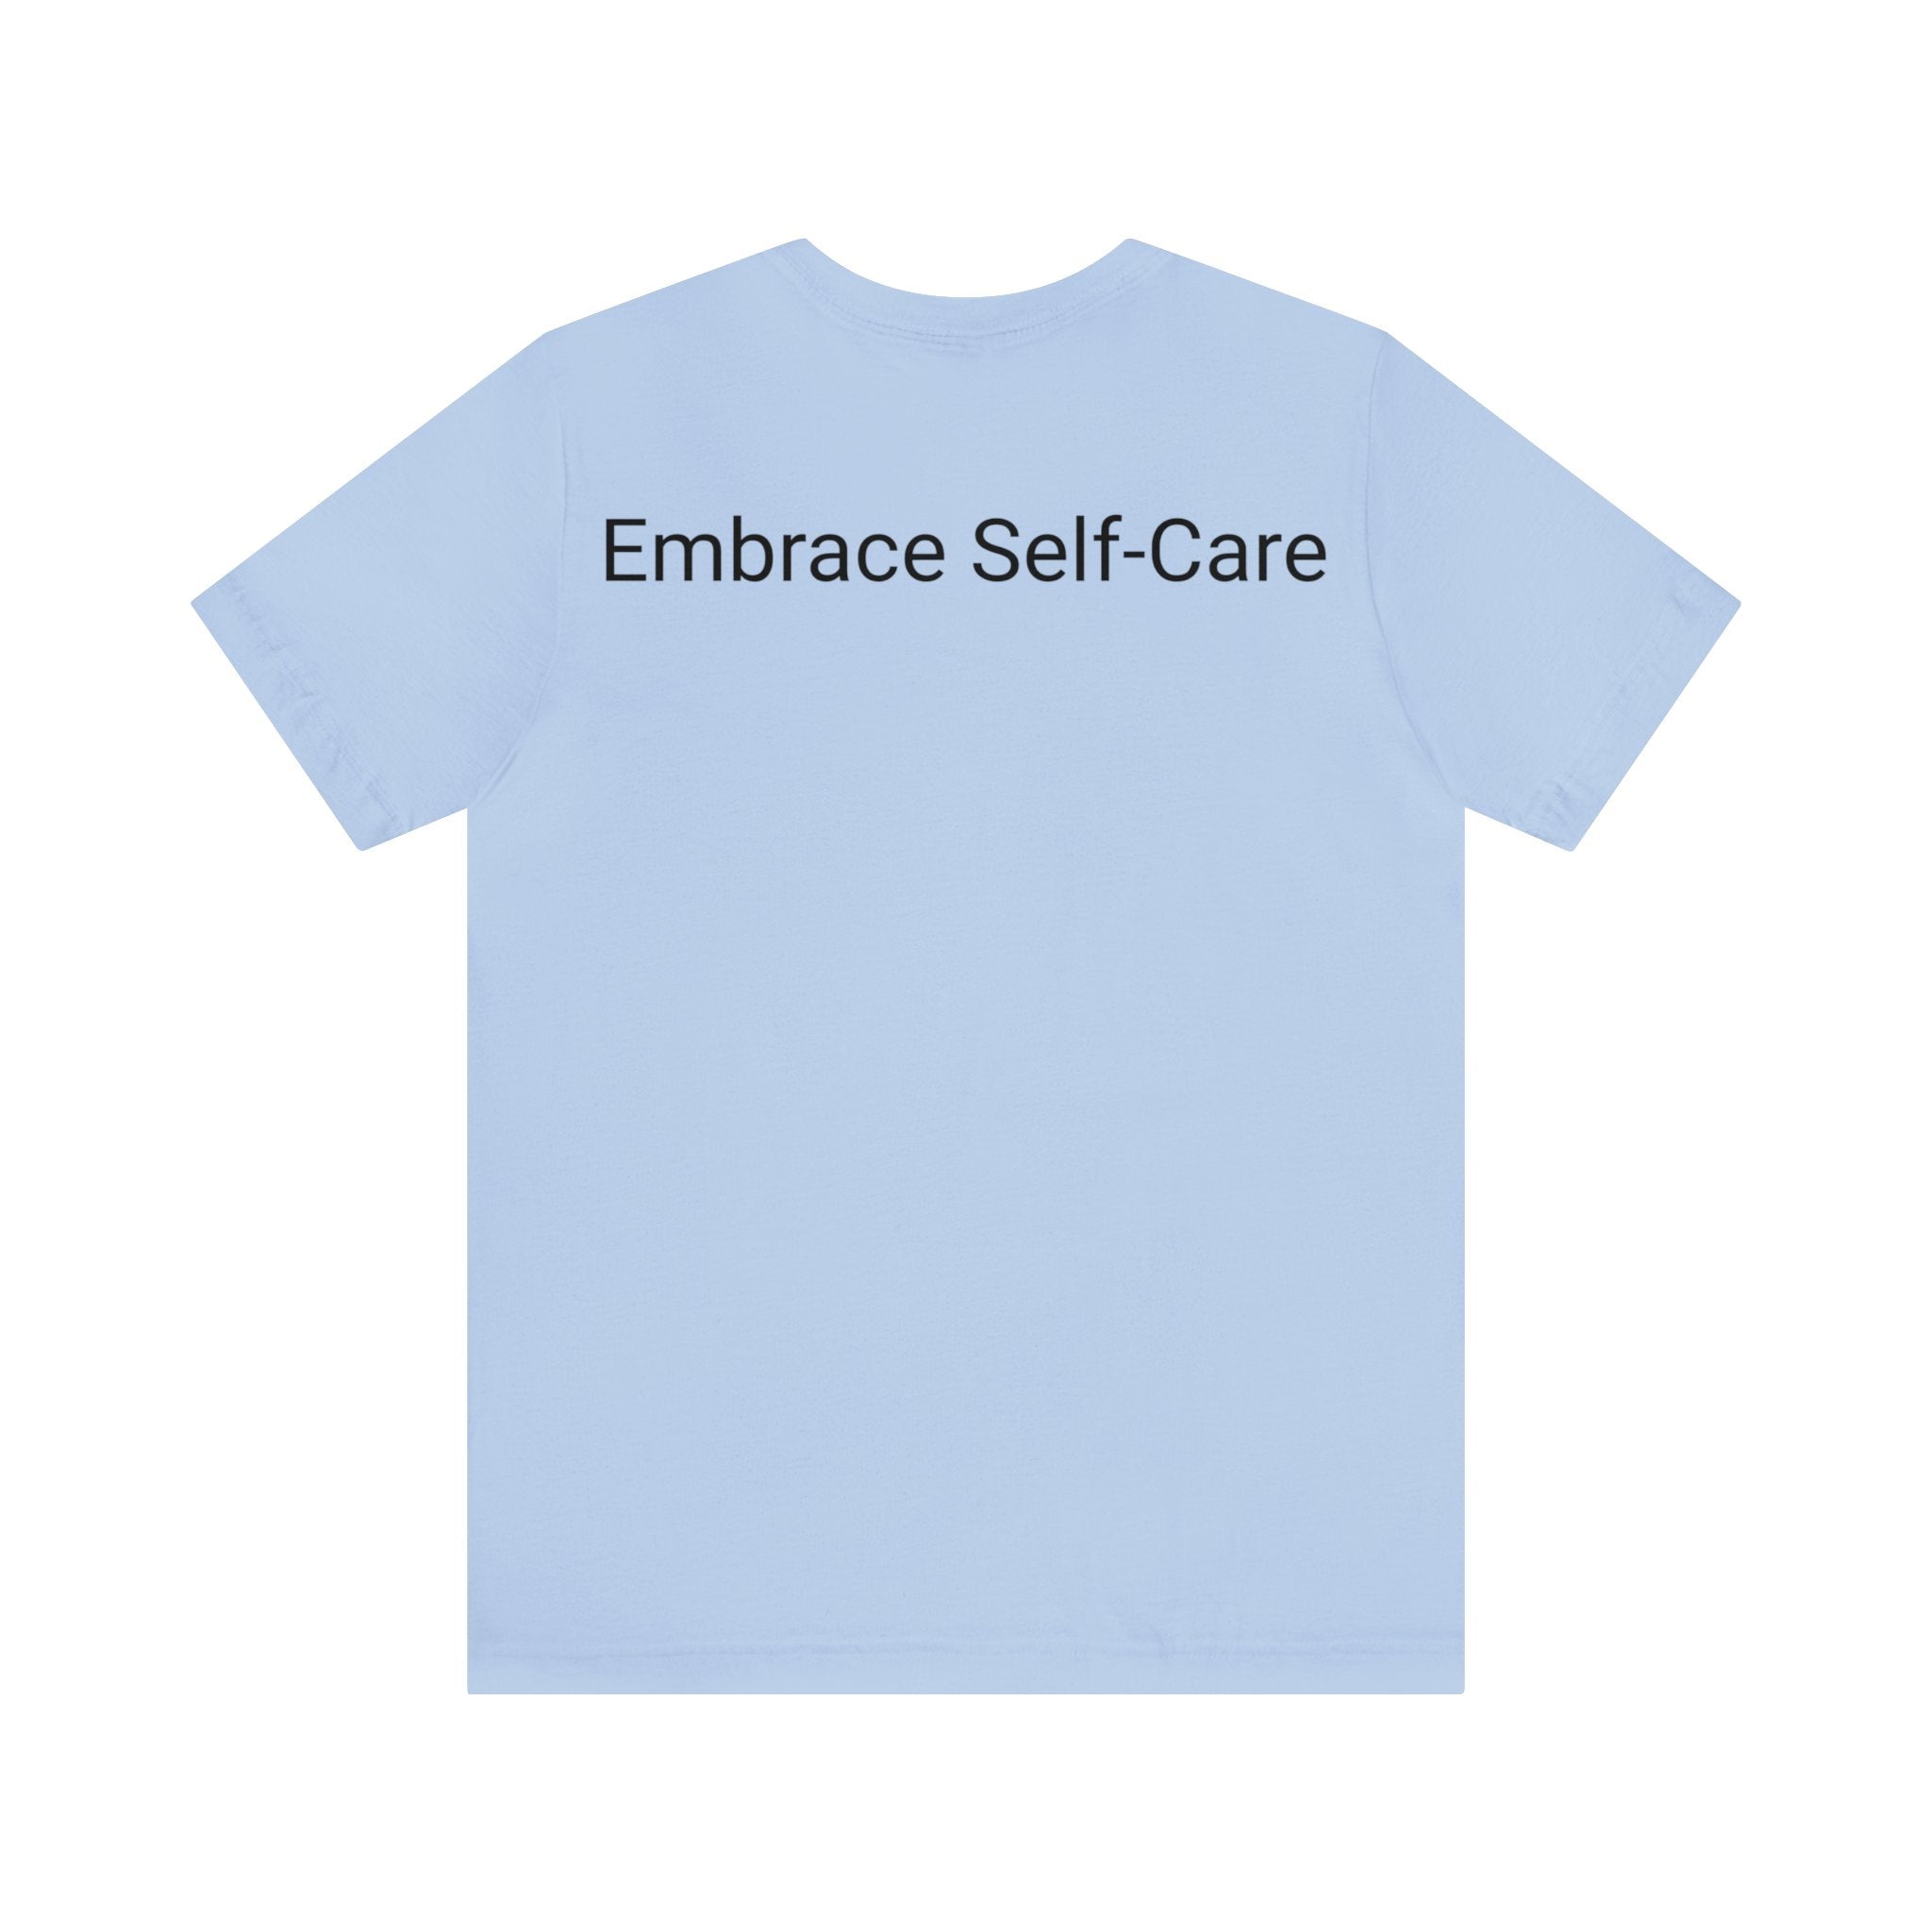 Embrace Self-Care Jersey Tee - Bella+Canvas 3001 Heather Mauve Airlume Cotton Bella+Canvas 3001 Crew Neckline Jersey Short Sleeve Lightweight Fabric Mental Health Support Retail Fit Tear-away Label Tee Unisex Tee T-Shirt 7031248591907075660_2048 Printify